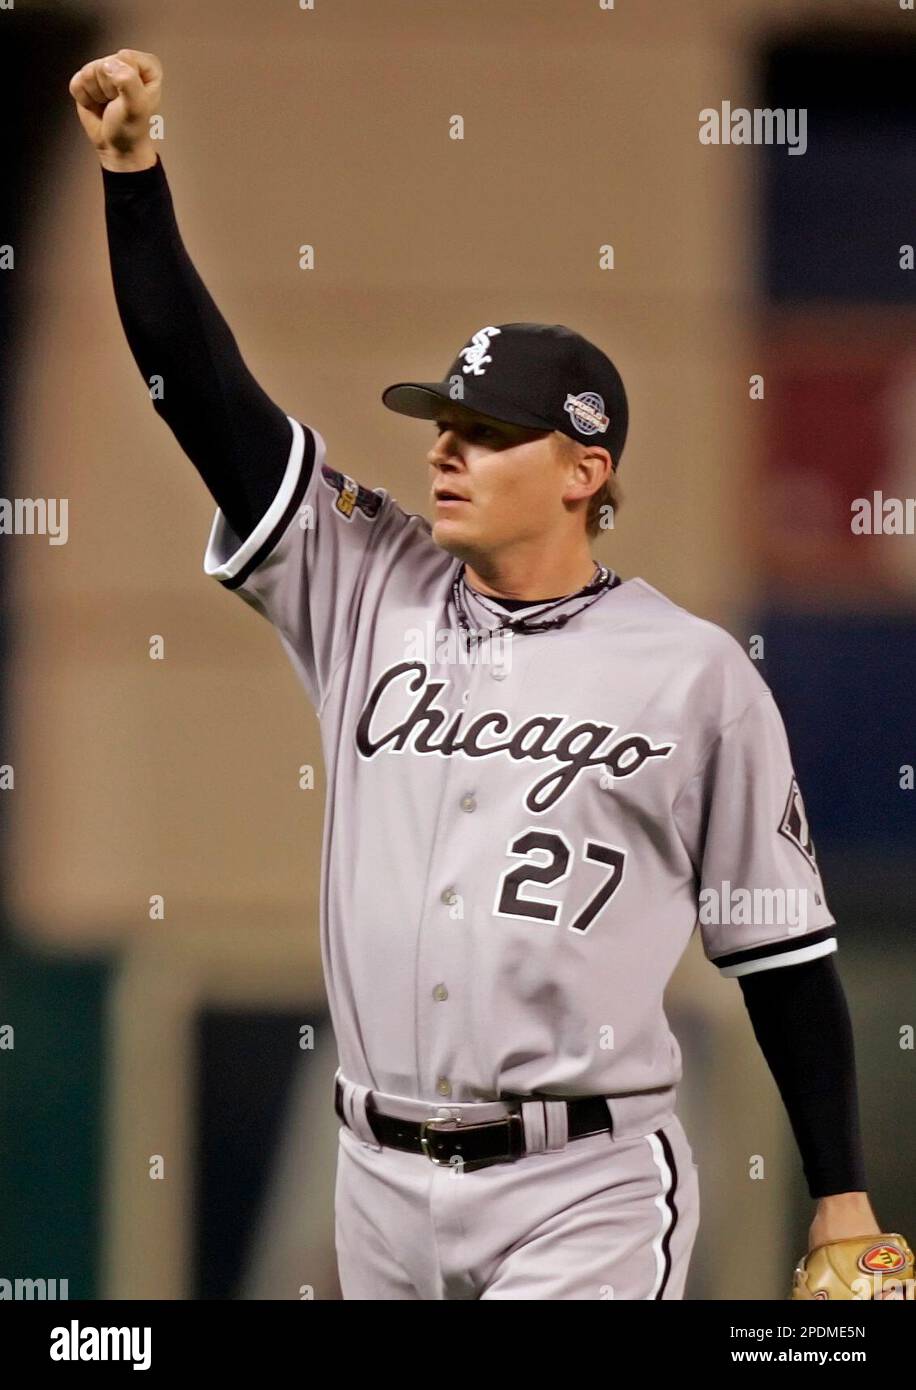 Chicago White Sox's Geoff Blum celebrates after the White Sox